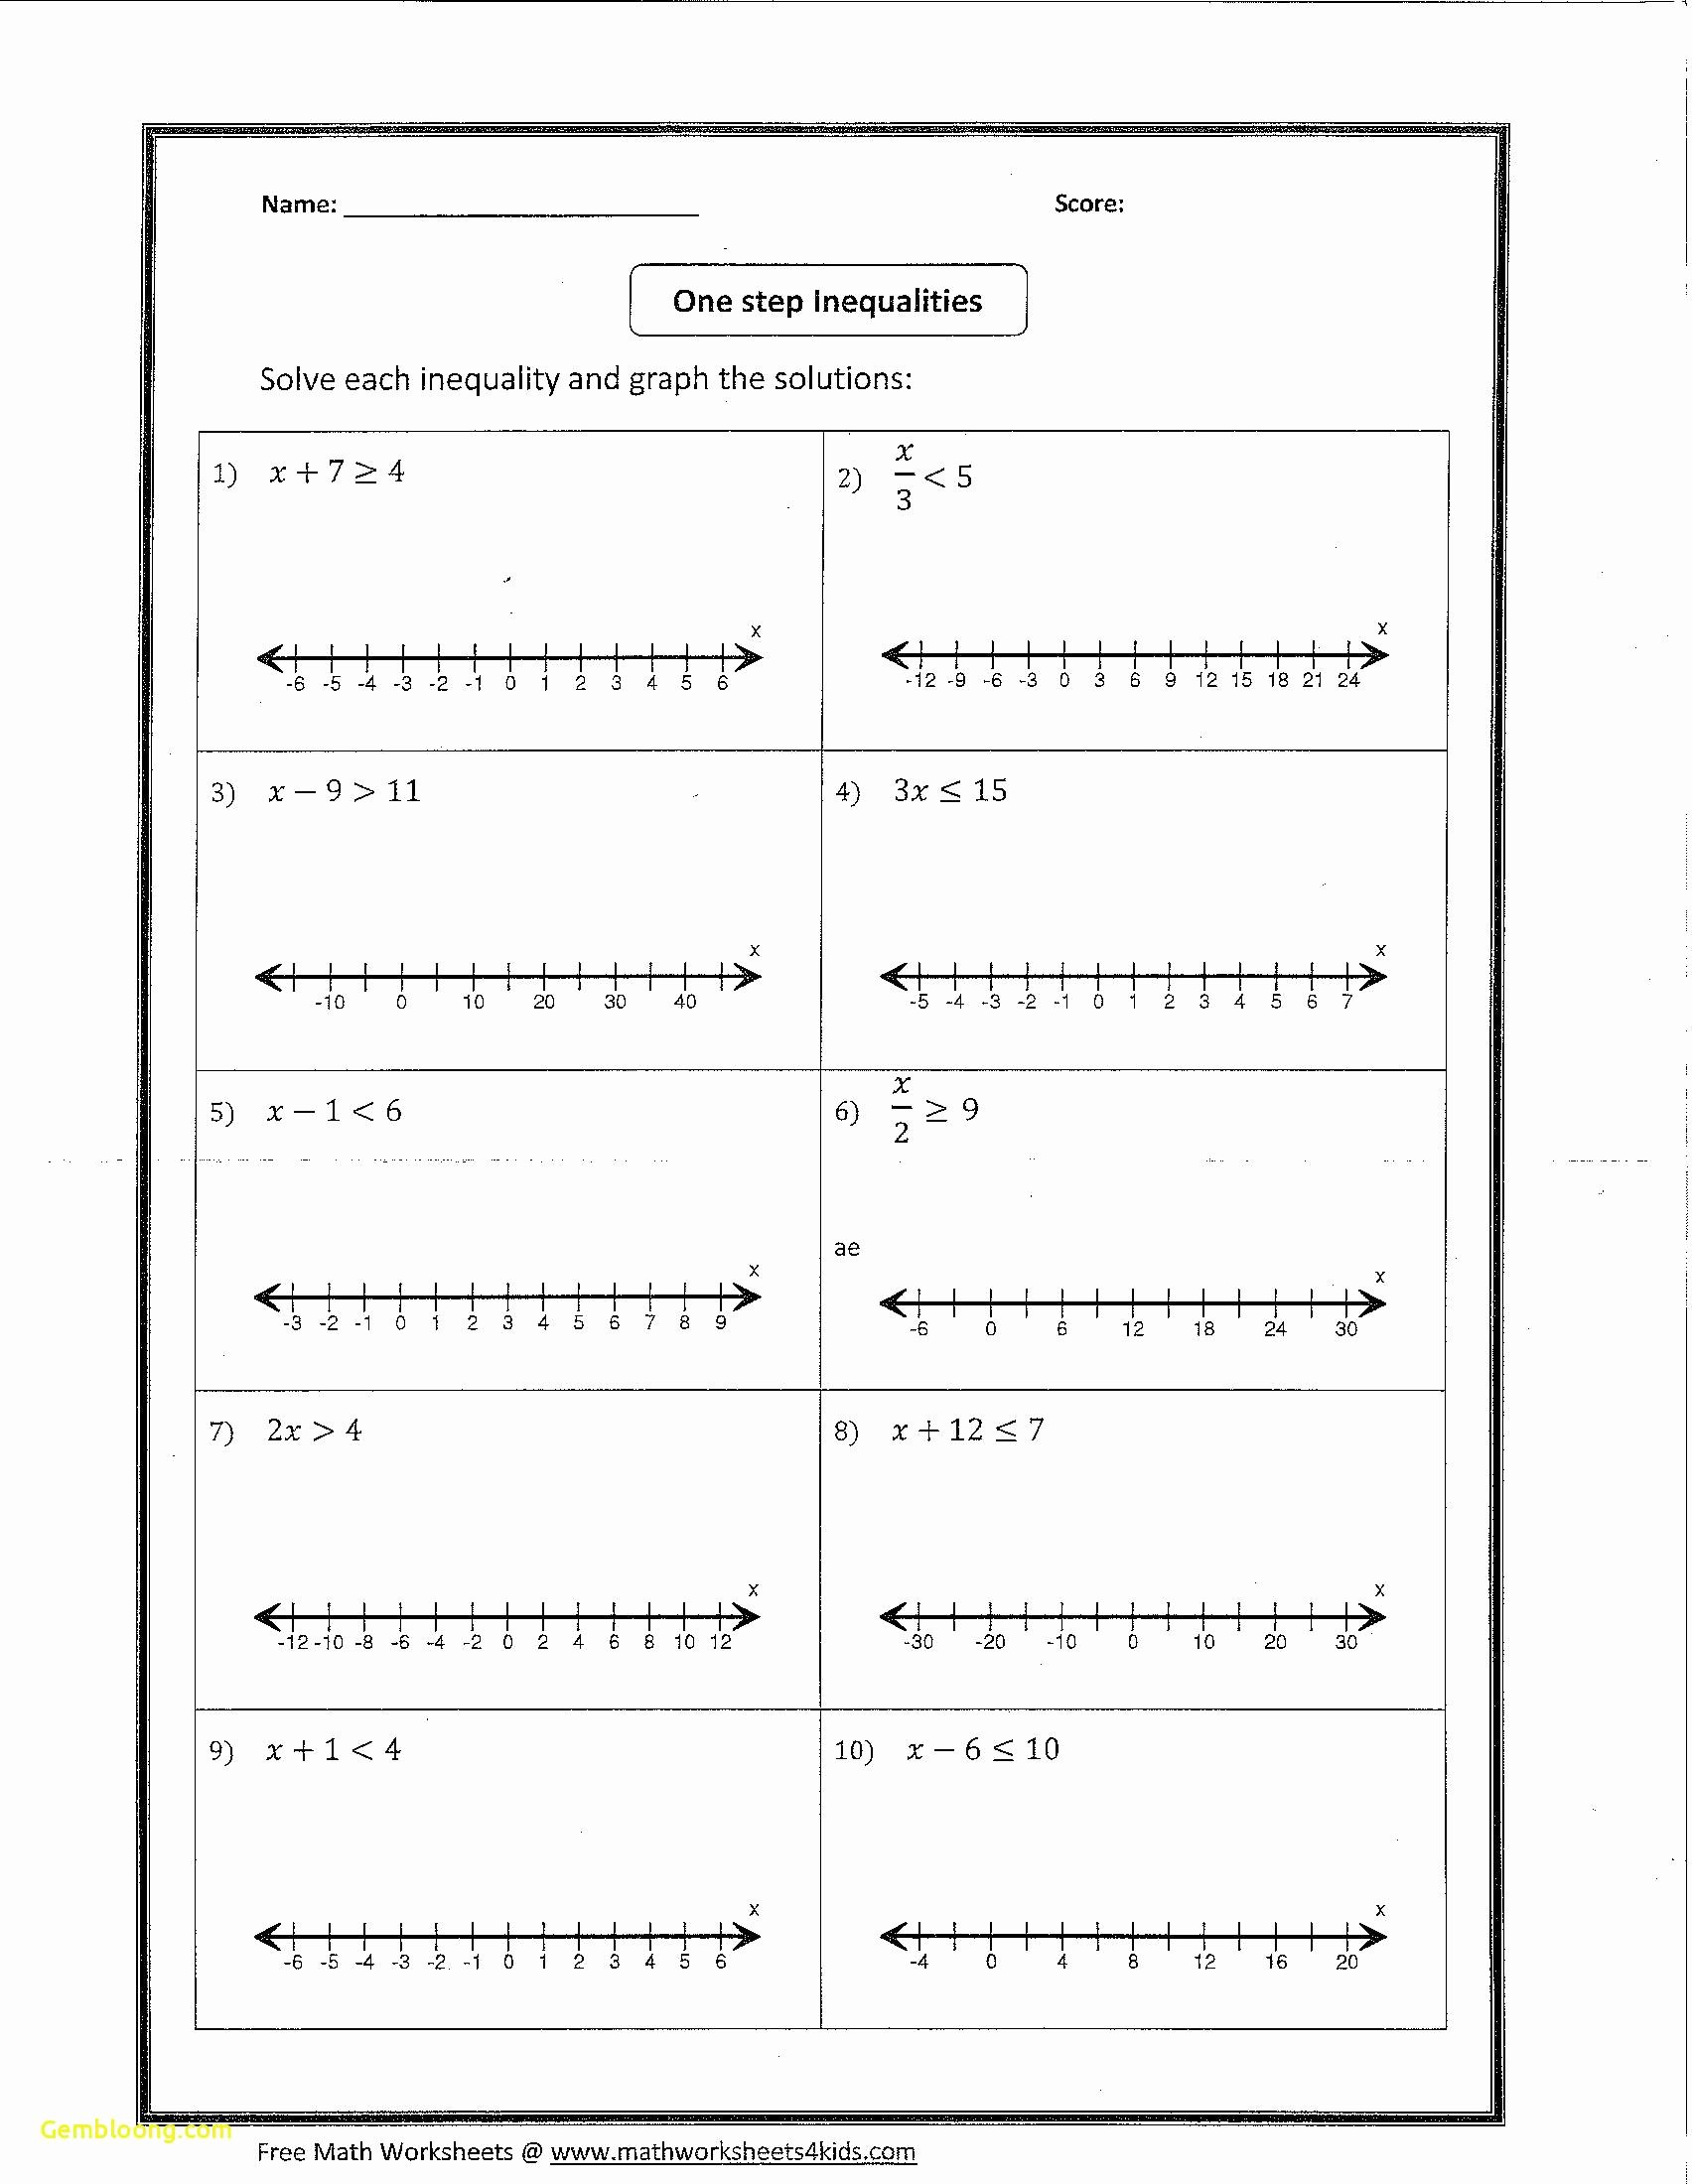 Compound Inequalities Worksheet Answers Unique Pound Inequalities Worksheet Cramerforcongress